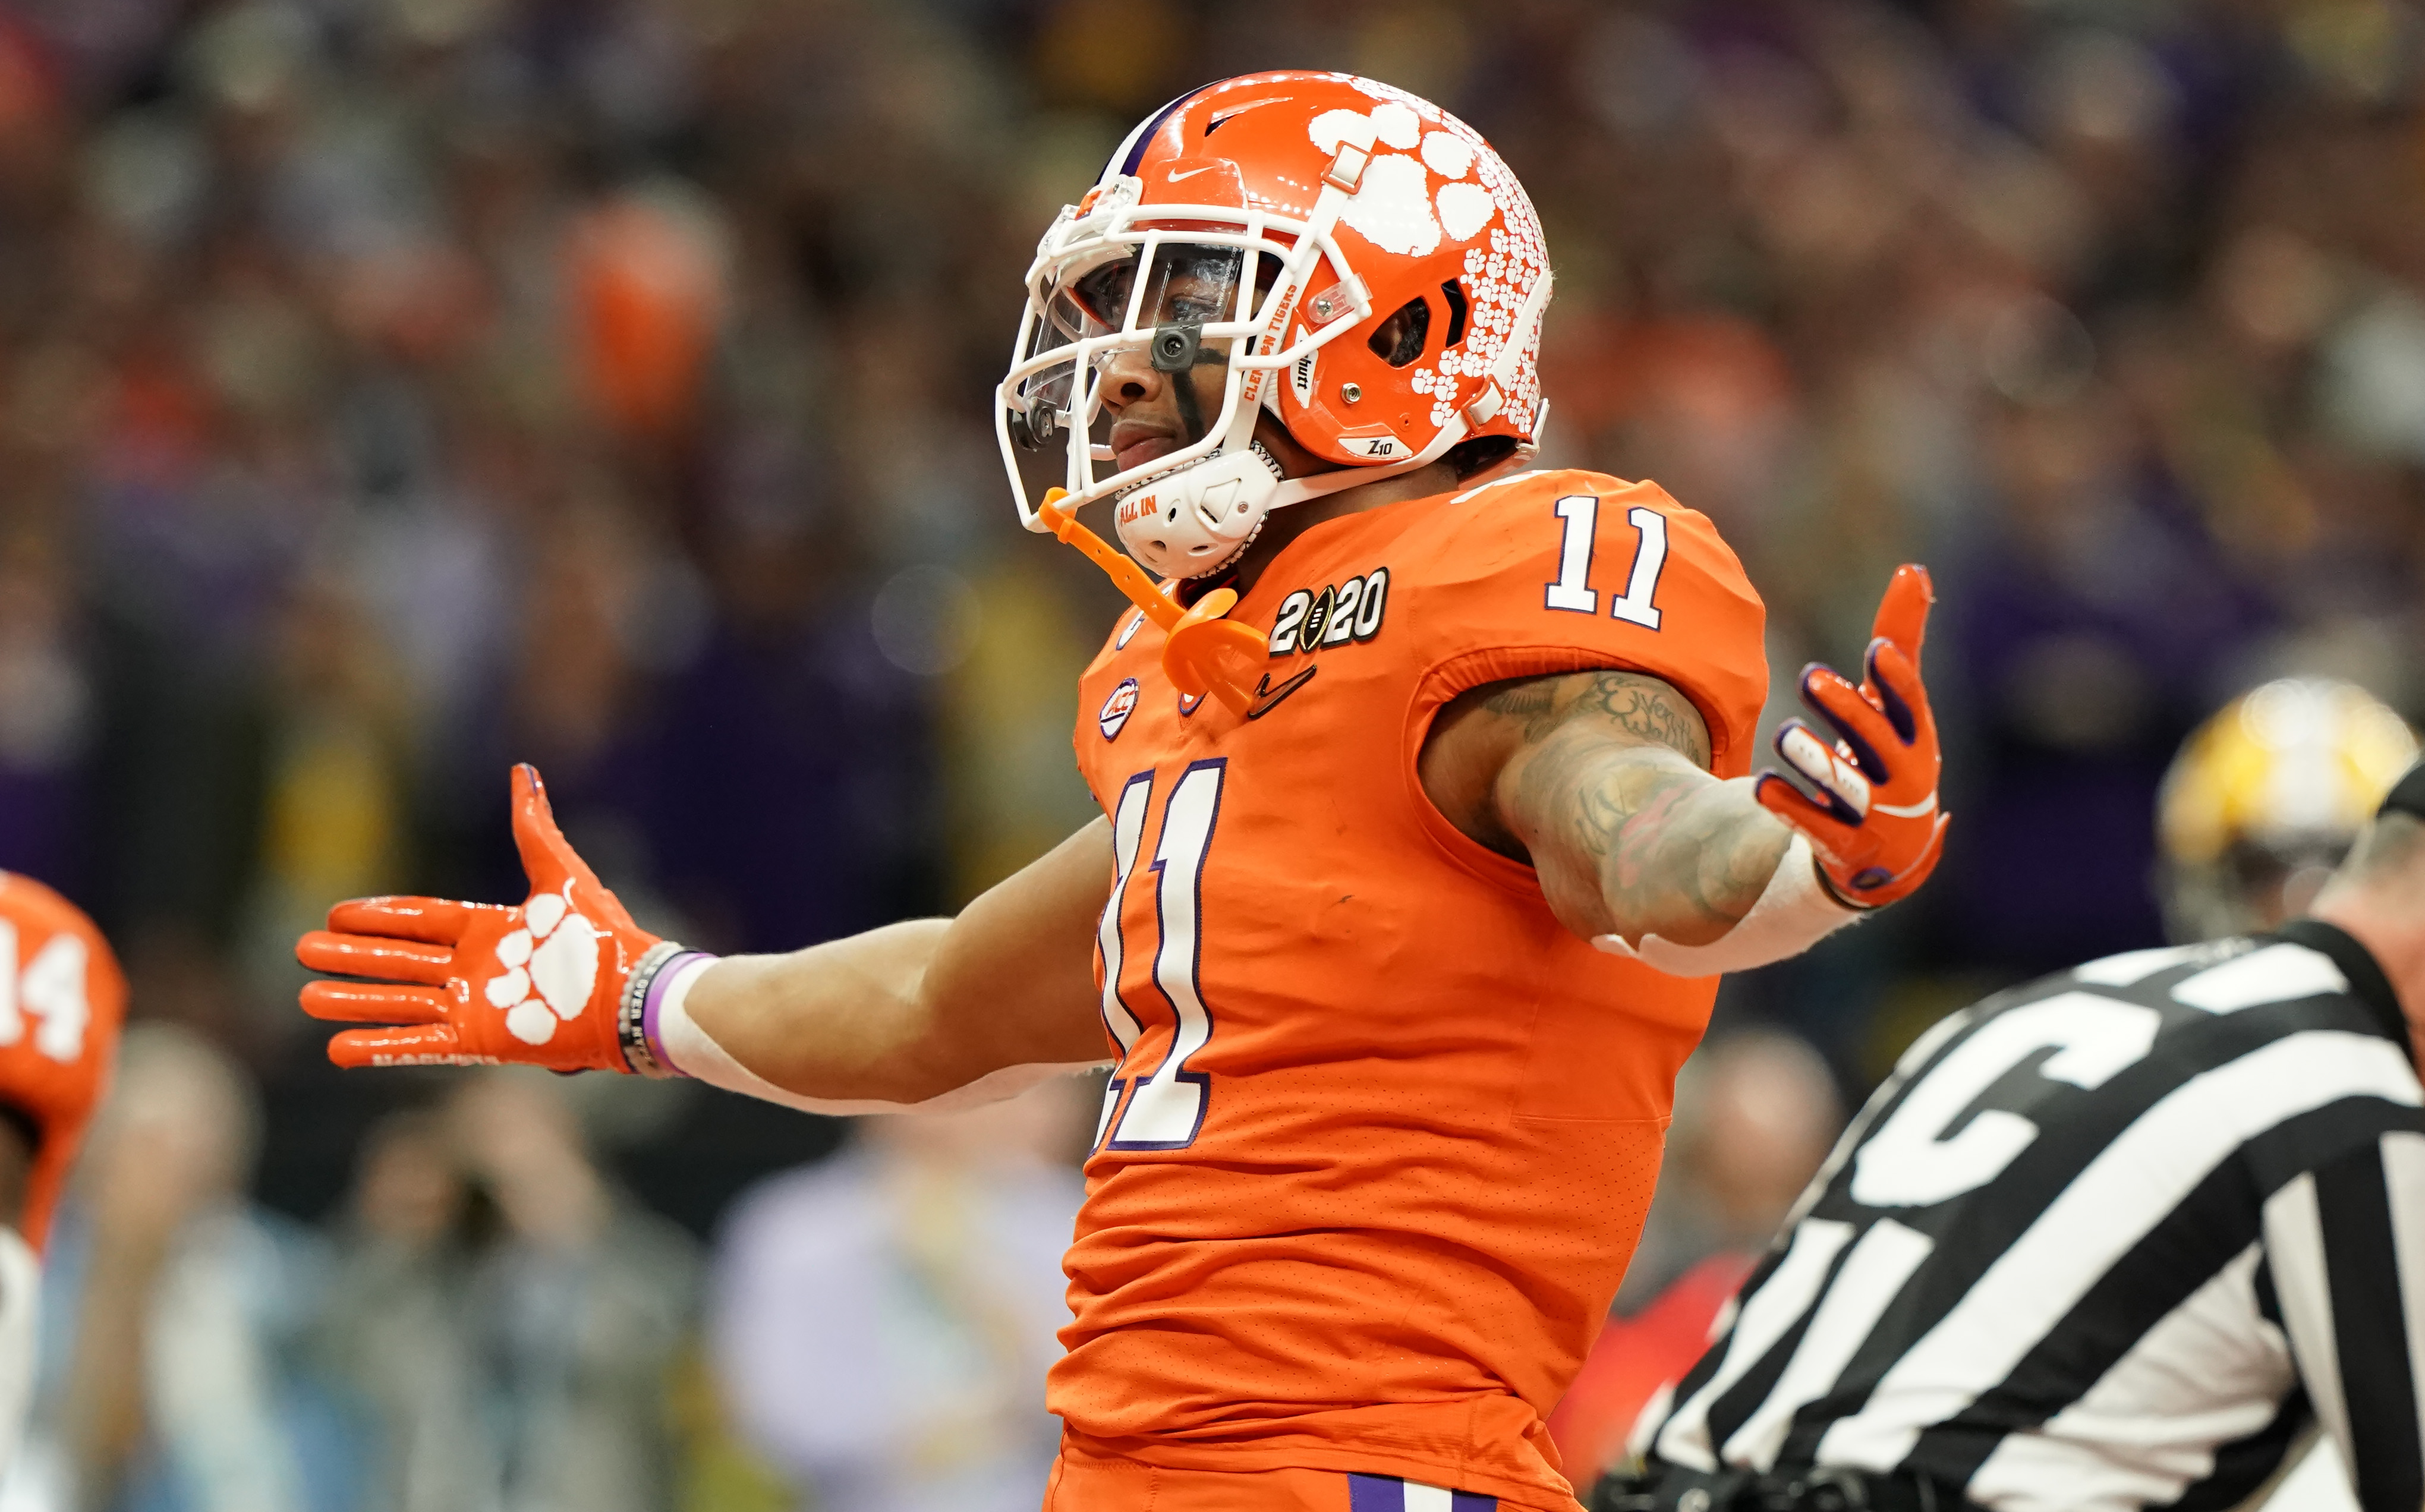 2020 NFL Draft Top 25 defensive players ranked, analyzed